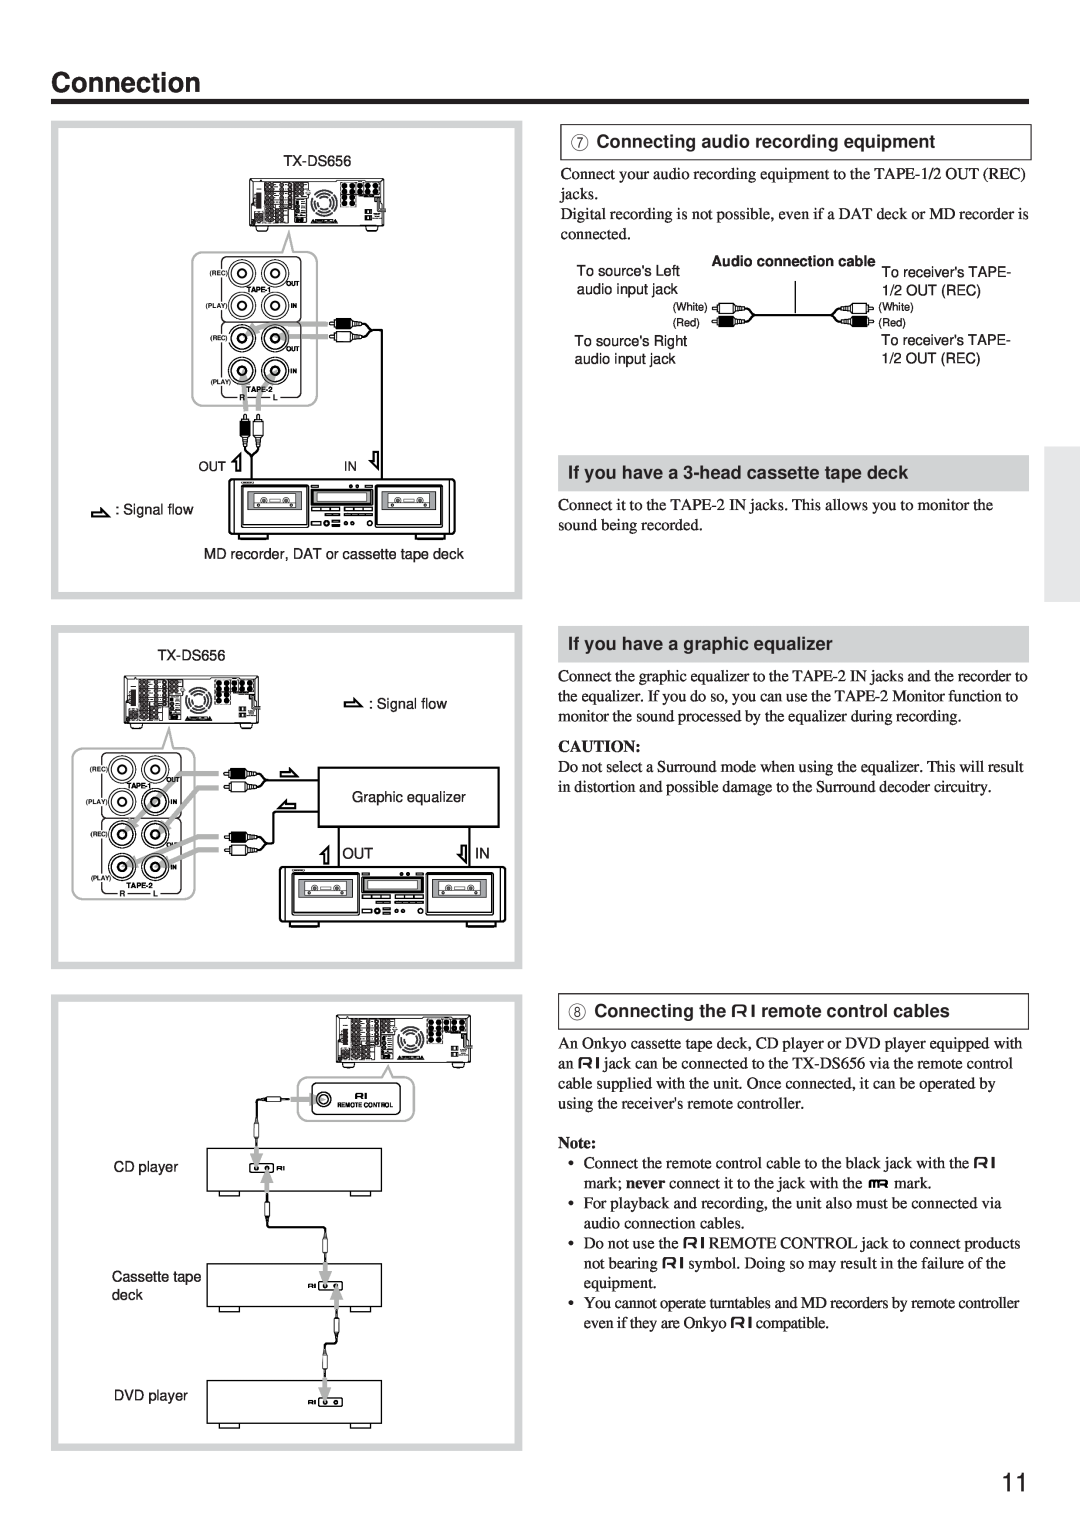 Onkyo TX-DS656 instruction manual Connection, 7Connecting audio recording equipment, If you have a 3-headcassette tape deck 